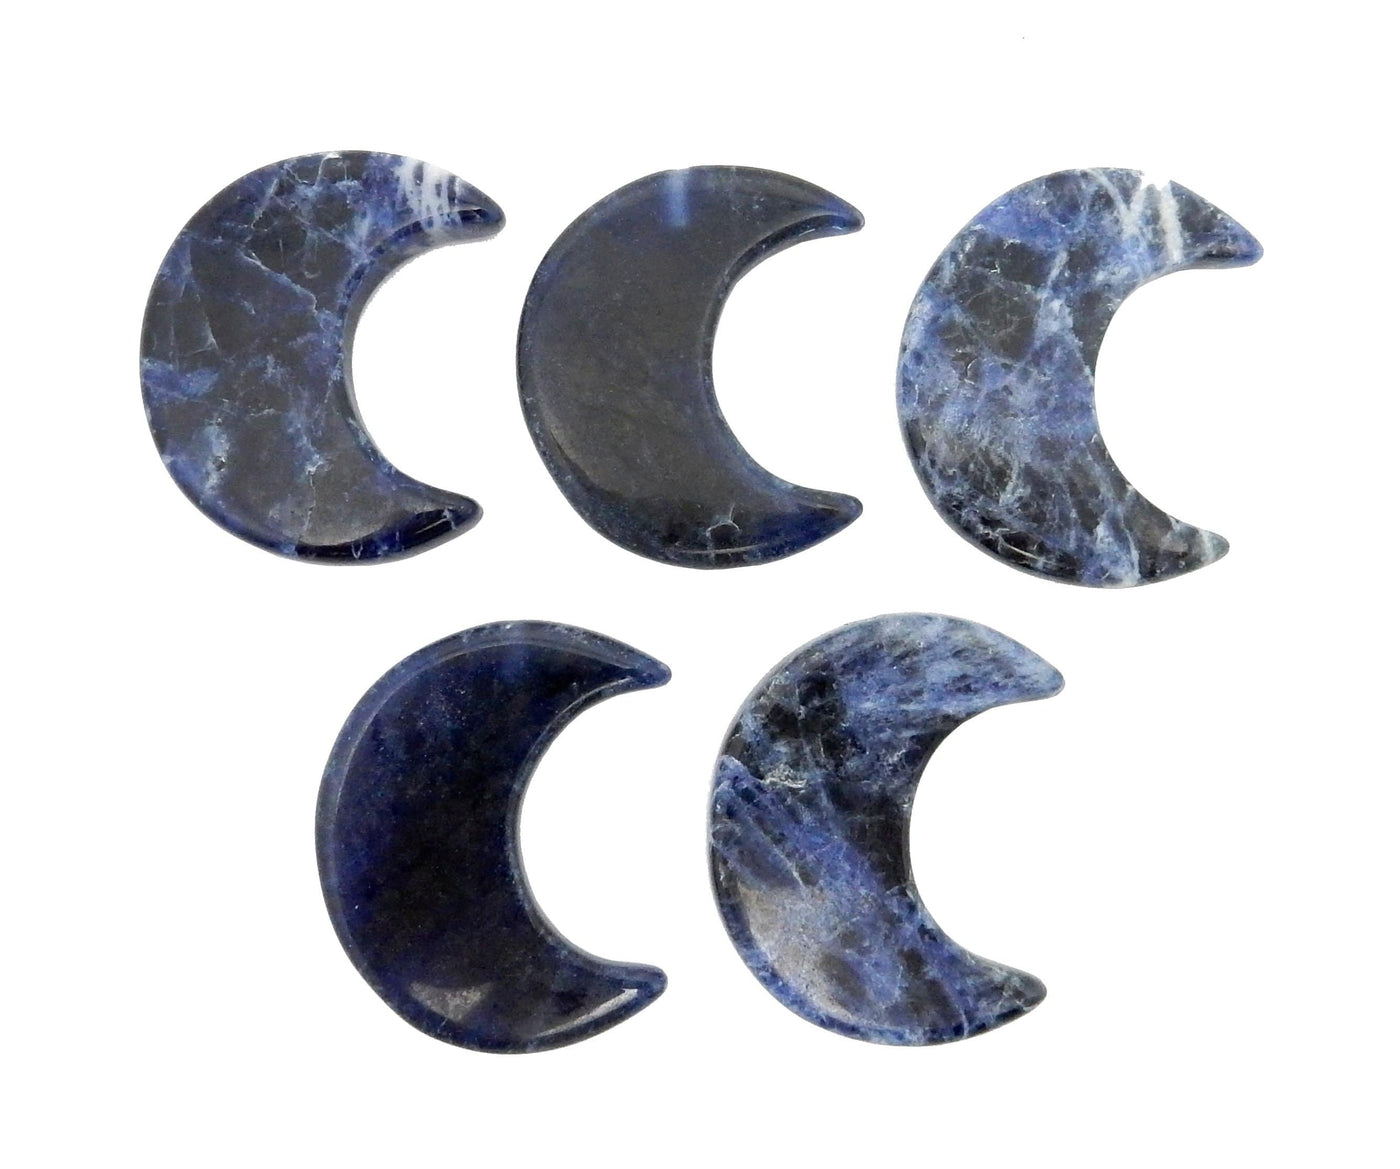 Five Blue Sodalite Half Crescent Moons - Drilled, displayed on a white surface.